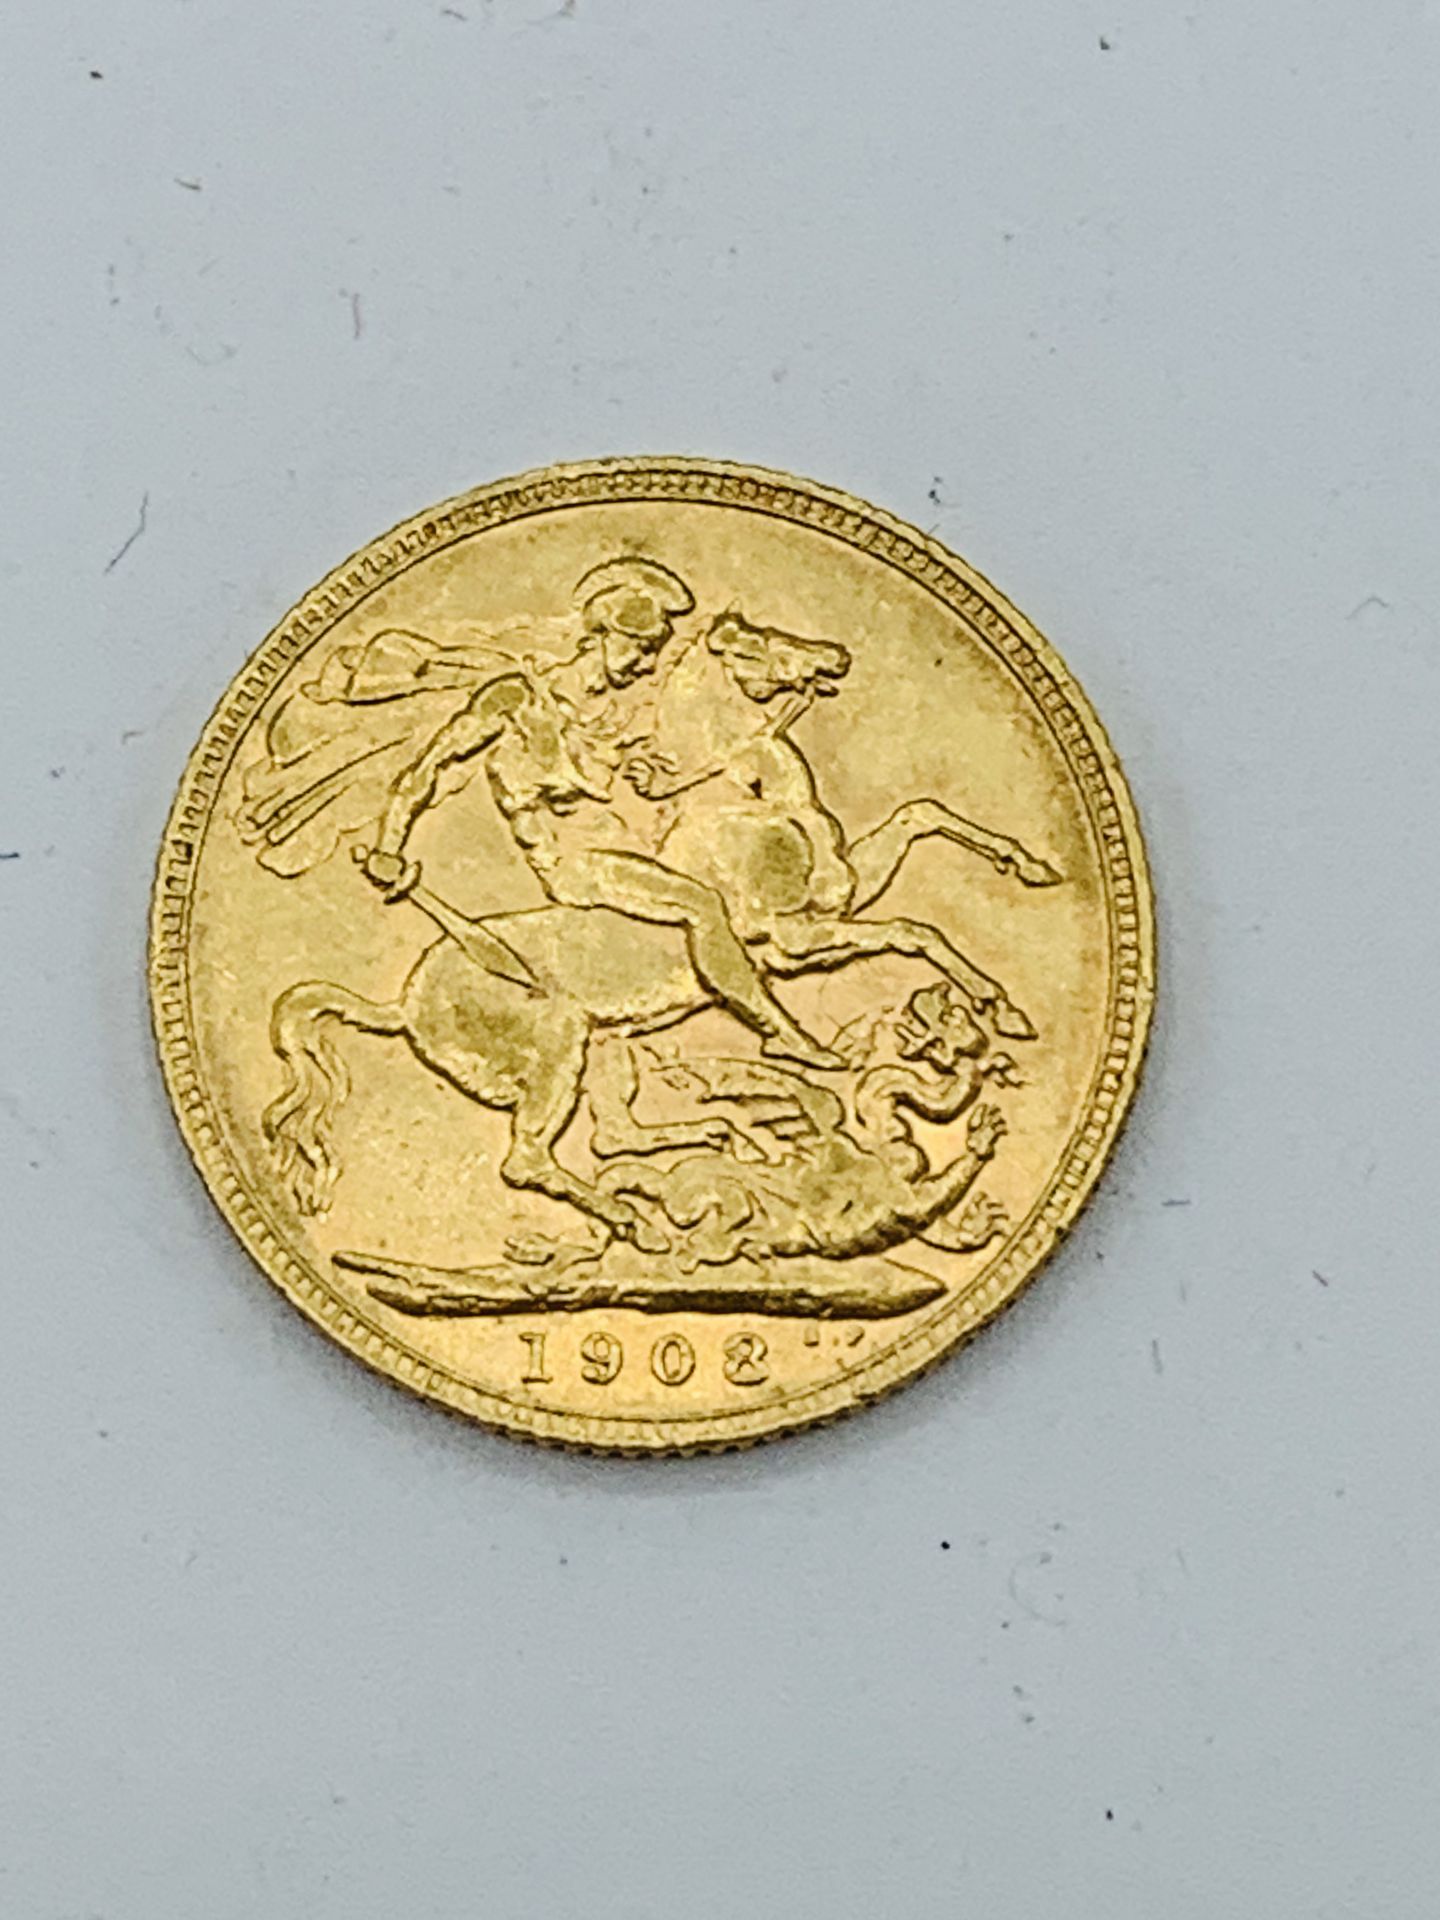 1908 Sovereign - Image 2 of 2